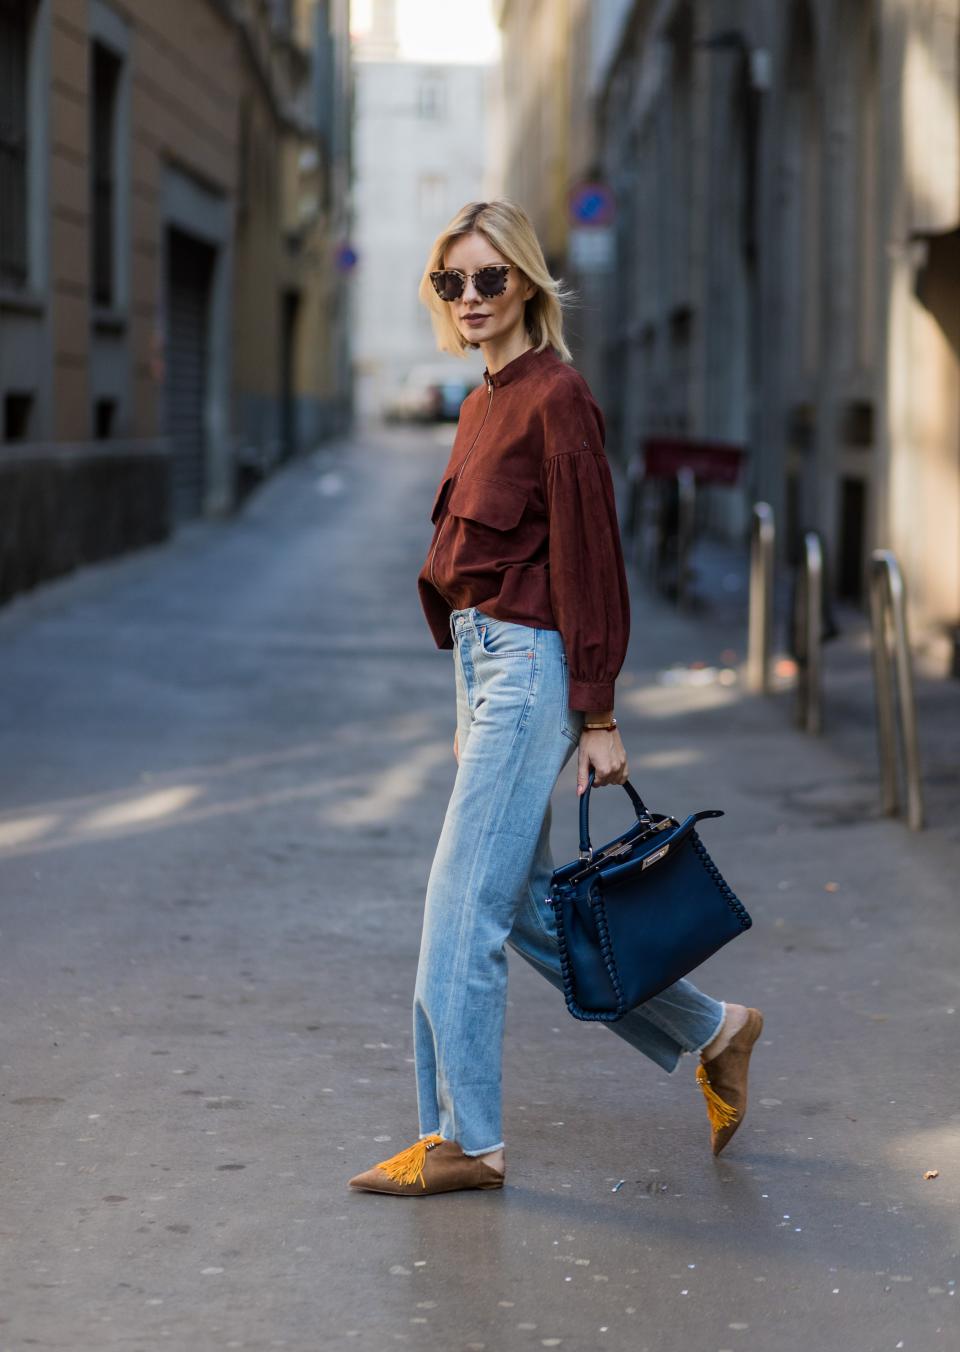 Date-Night Outfits That Include Jeans